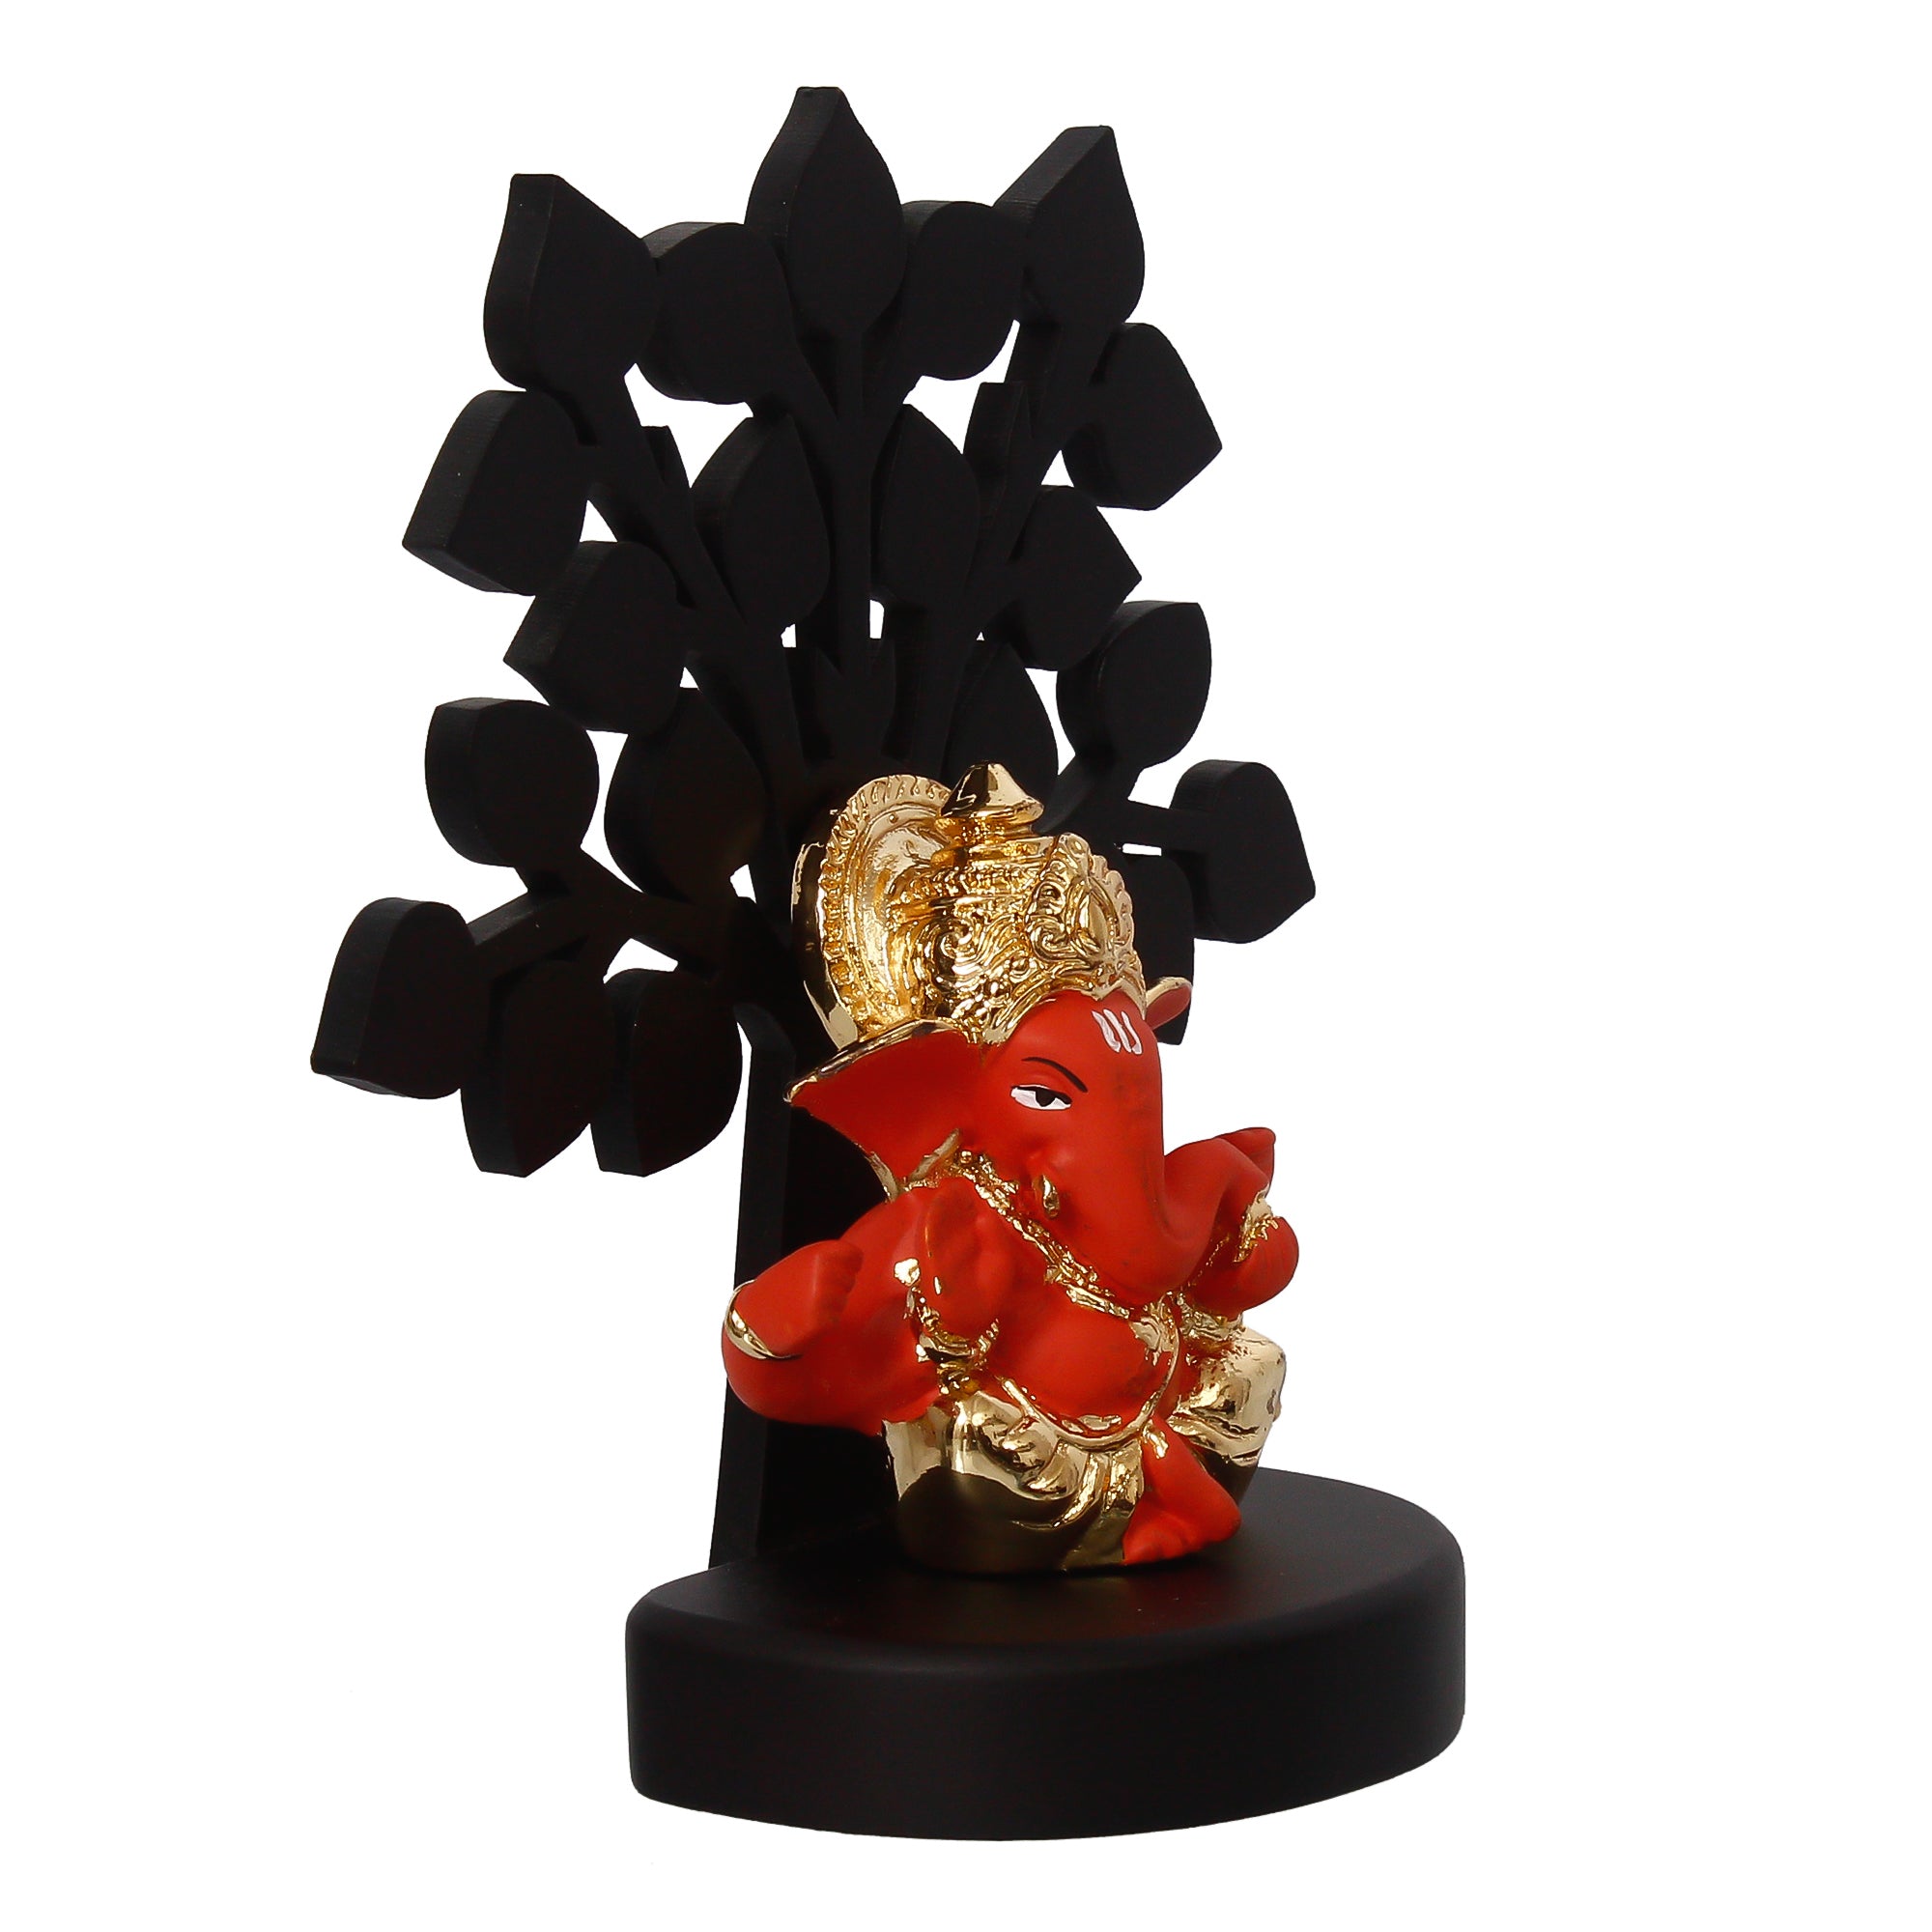 Gold Plated Orange Polyresin Ganesha Idol/Murti with Wooden Tree for Home, Temple, Office and Car Dashboard 5